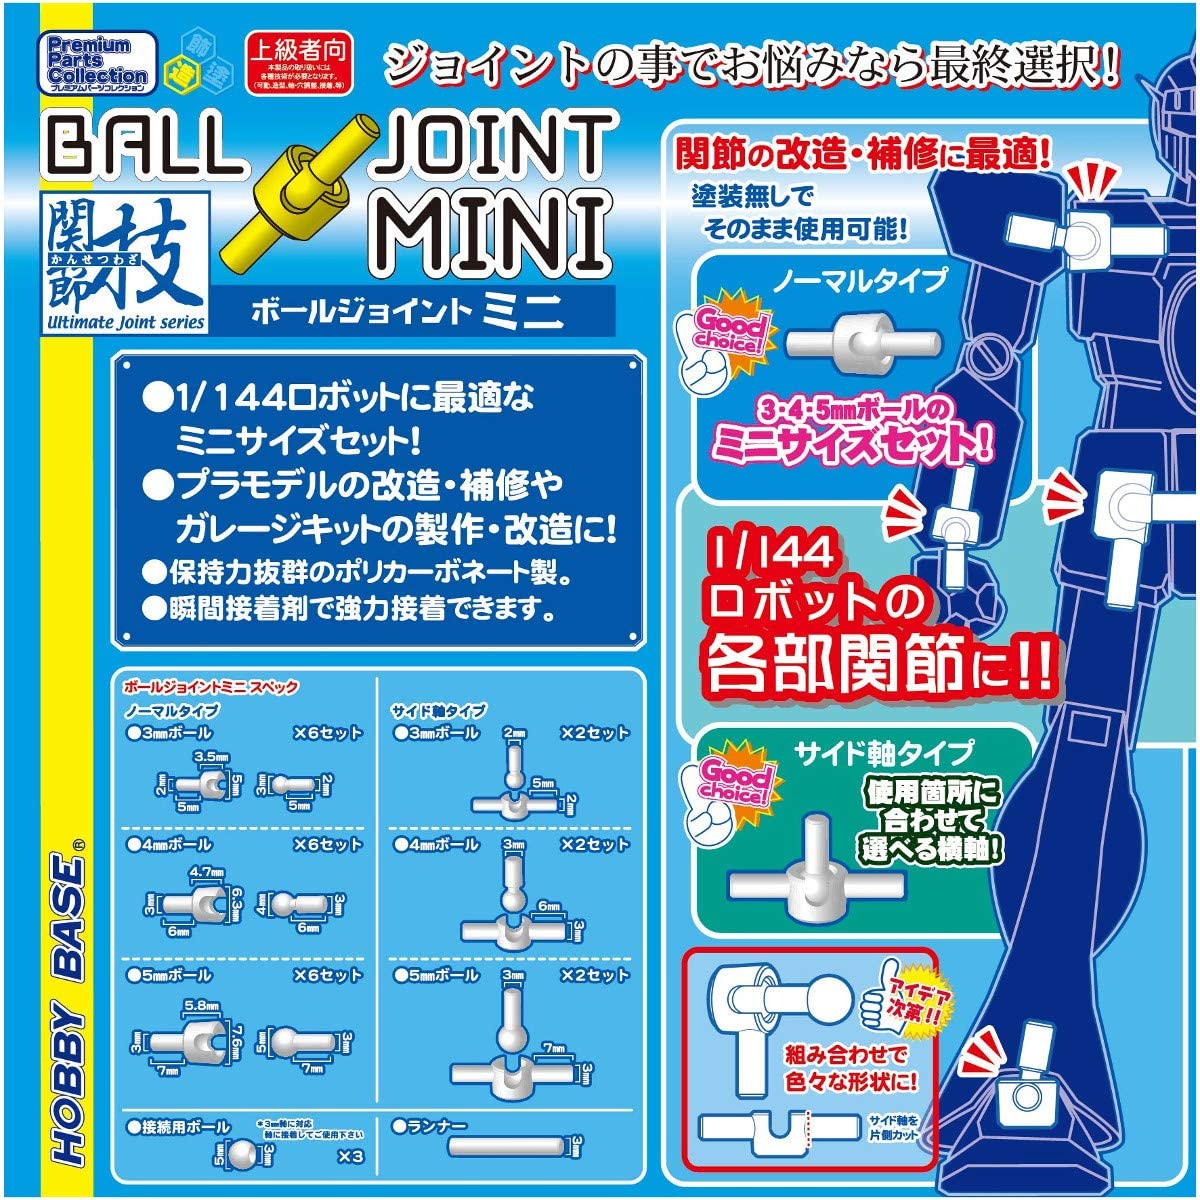 PPC-Tn70 Ultimate Joint Series Ball Joint Mini Clear